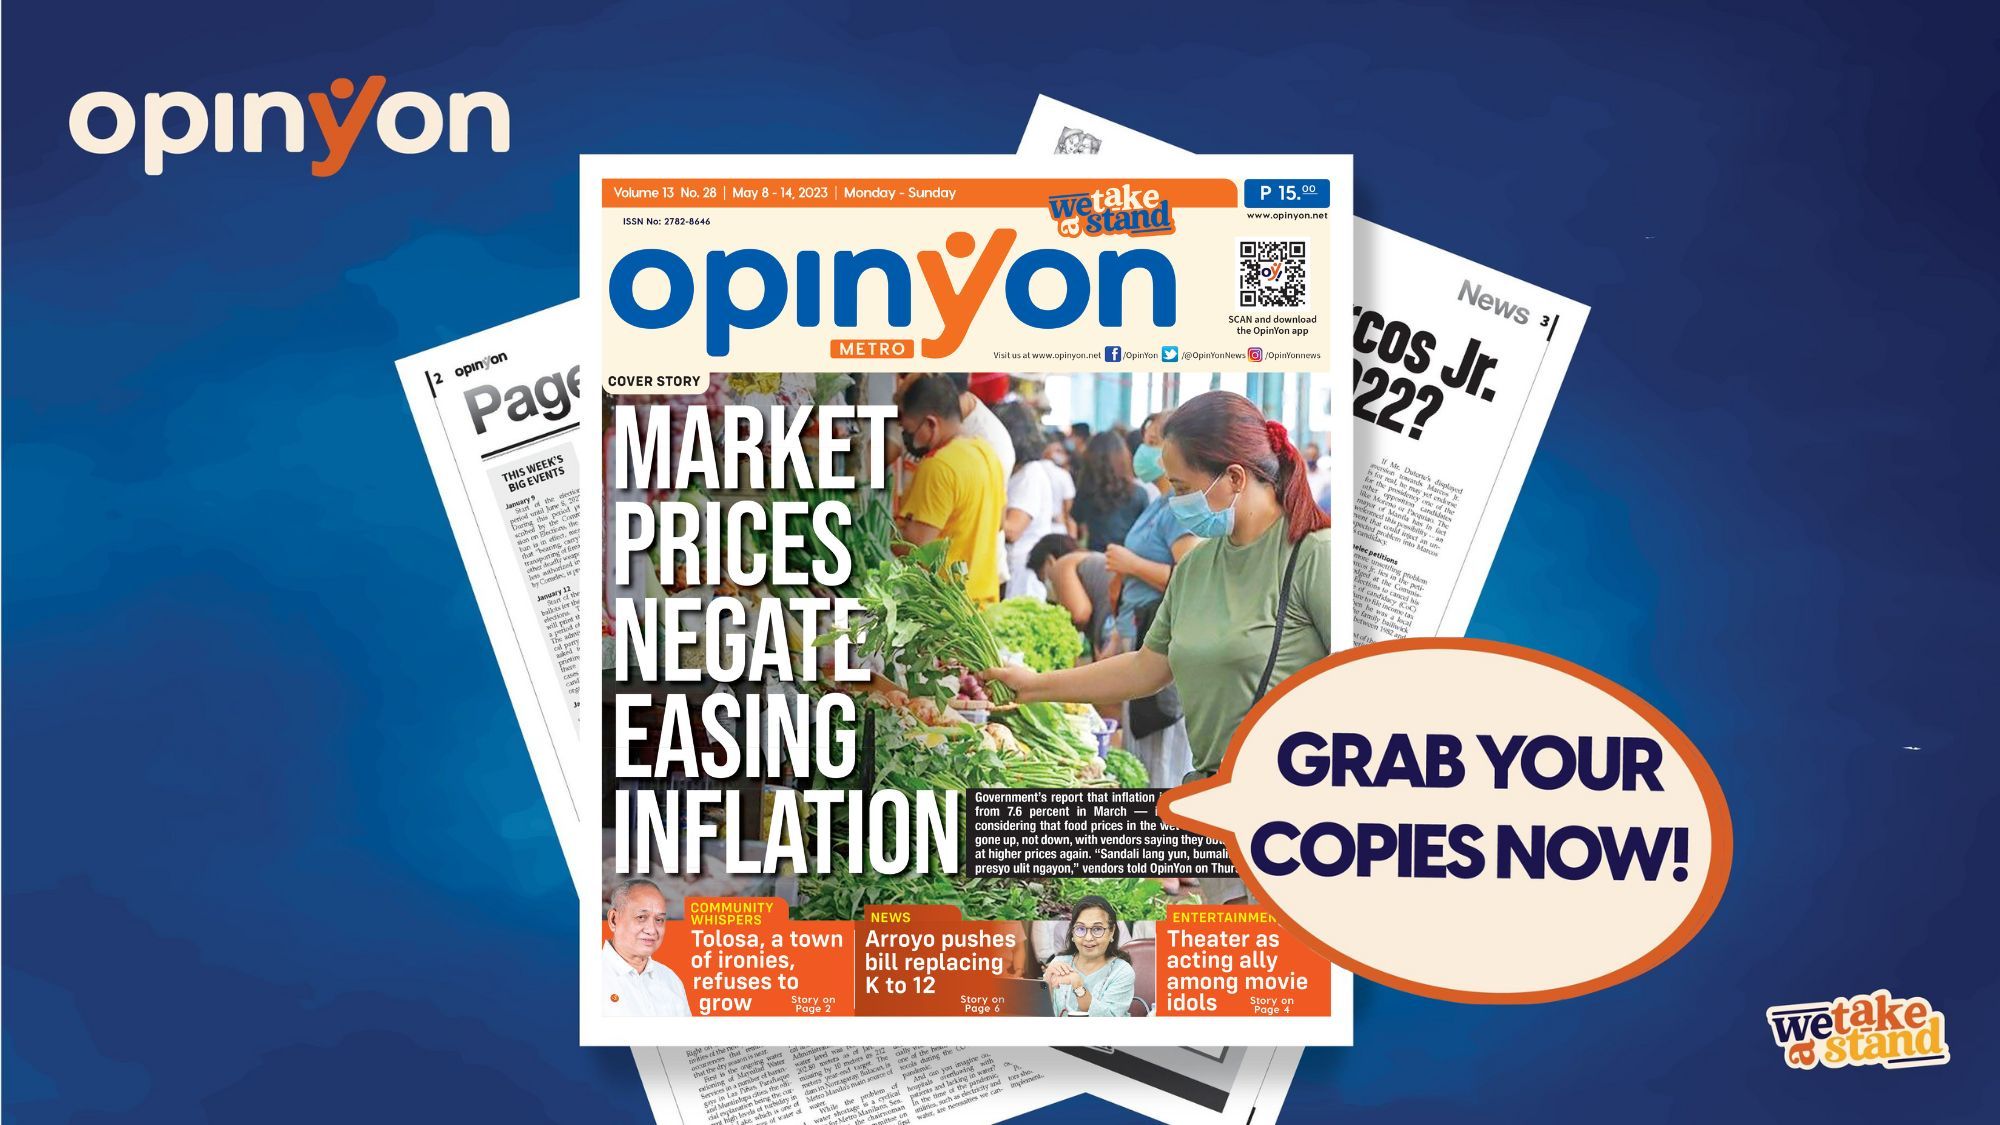 Market prices negate easing inflation